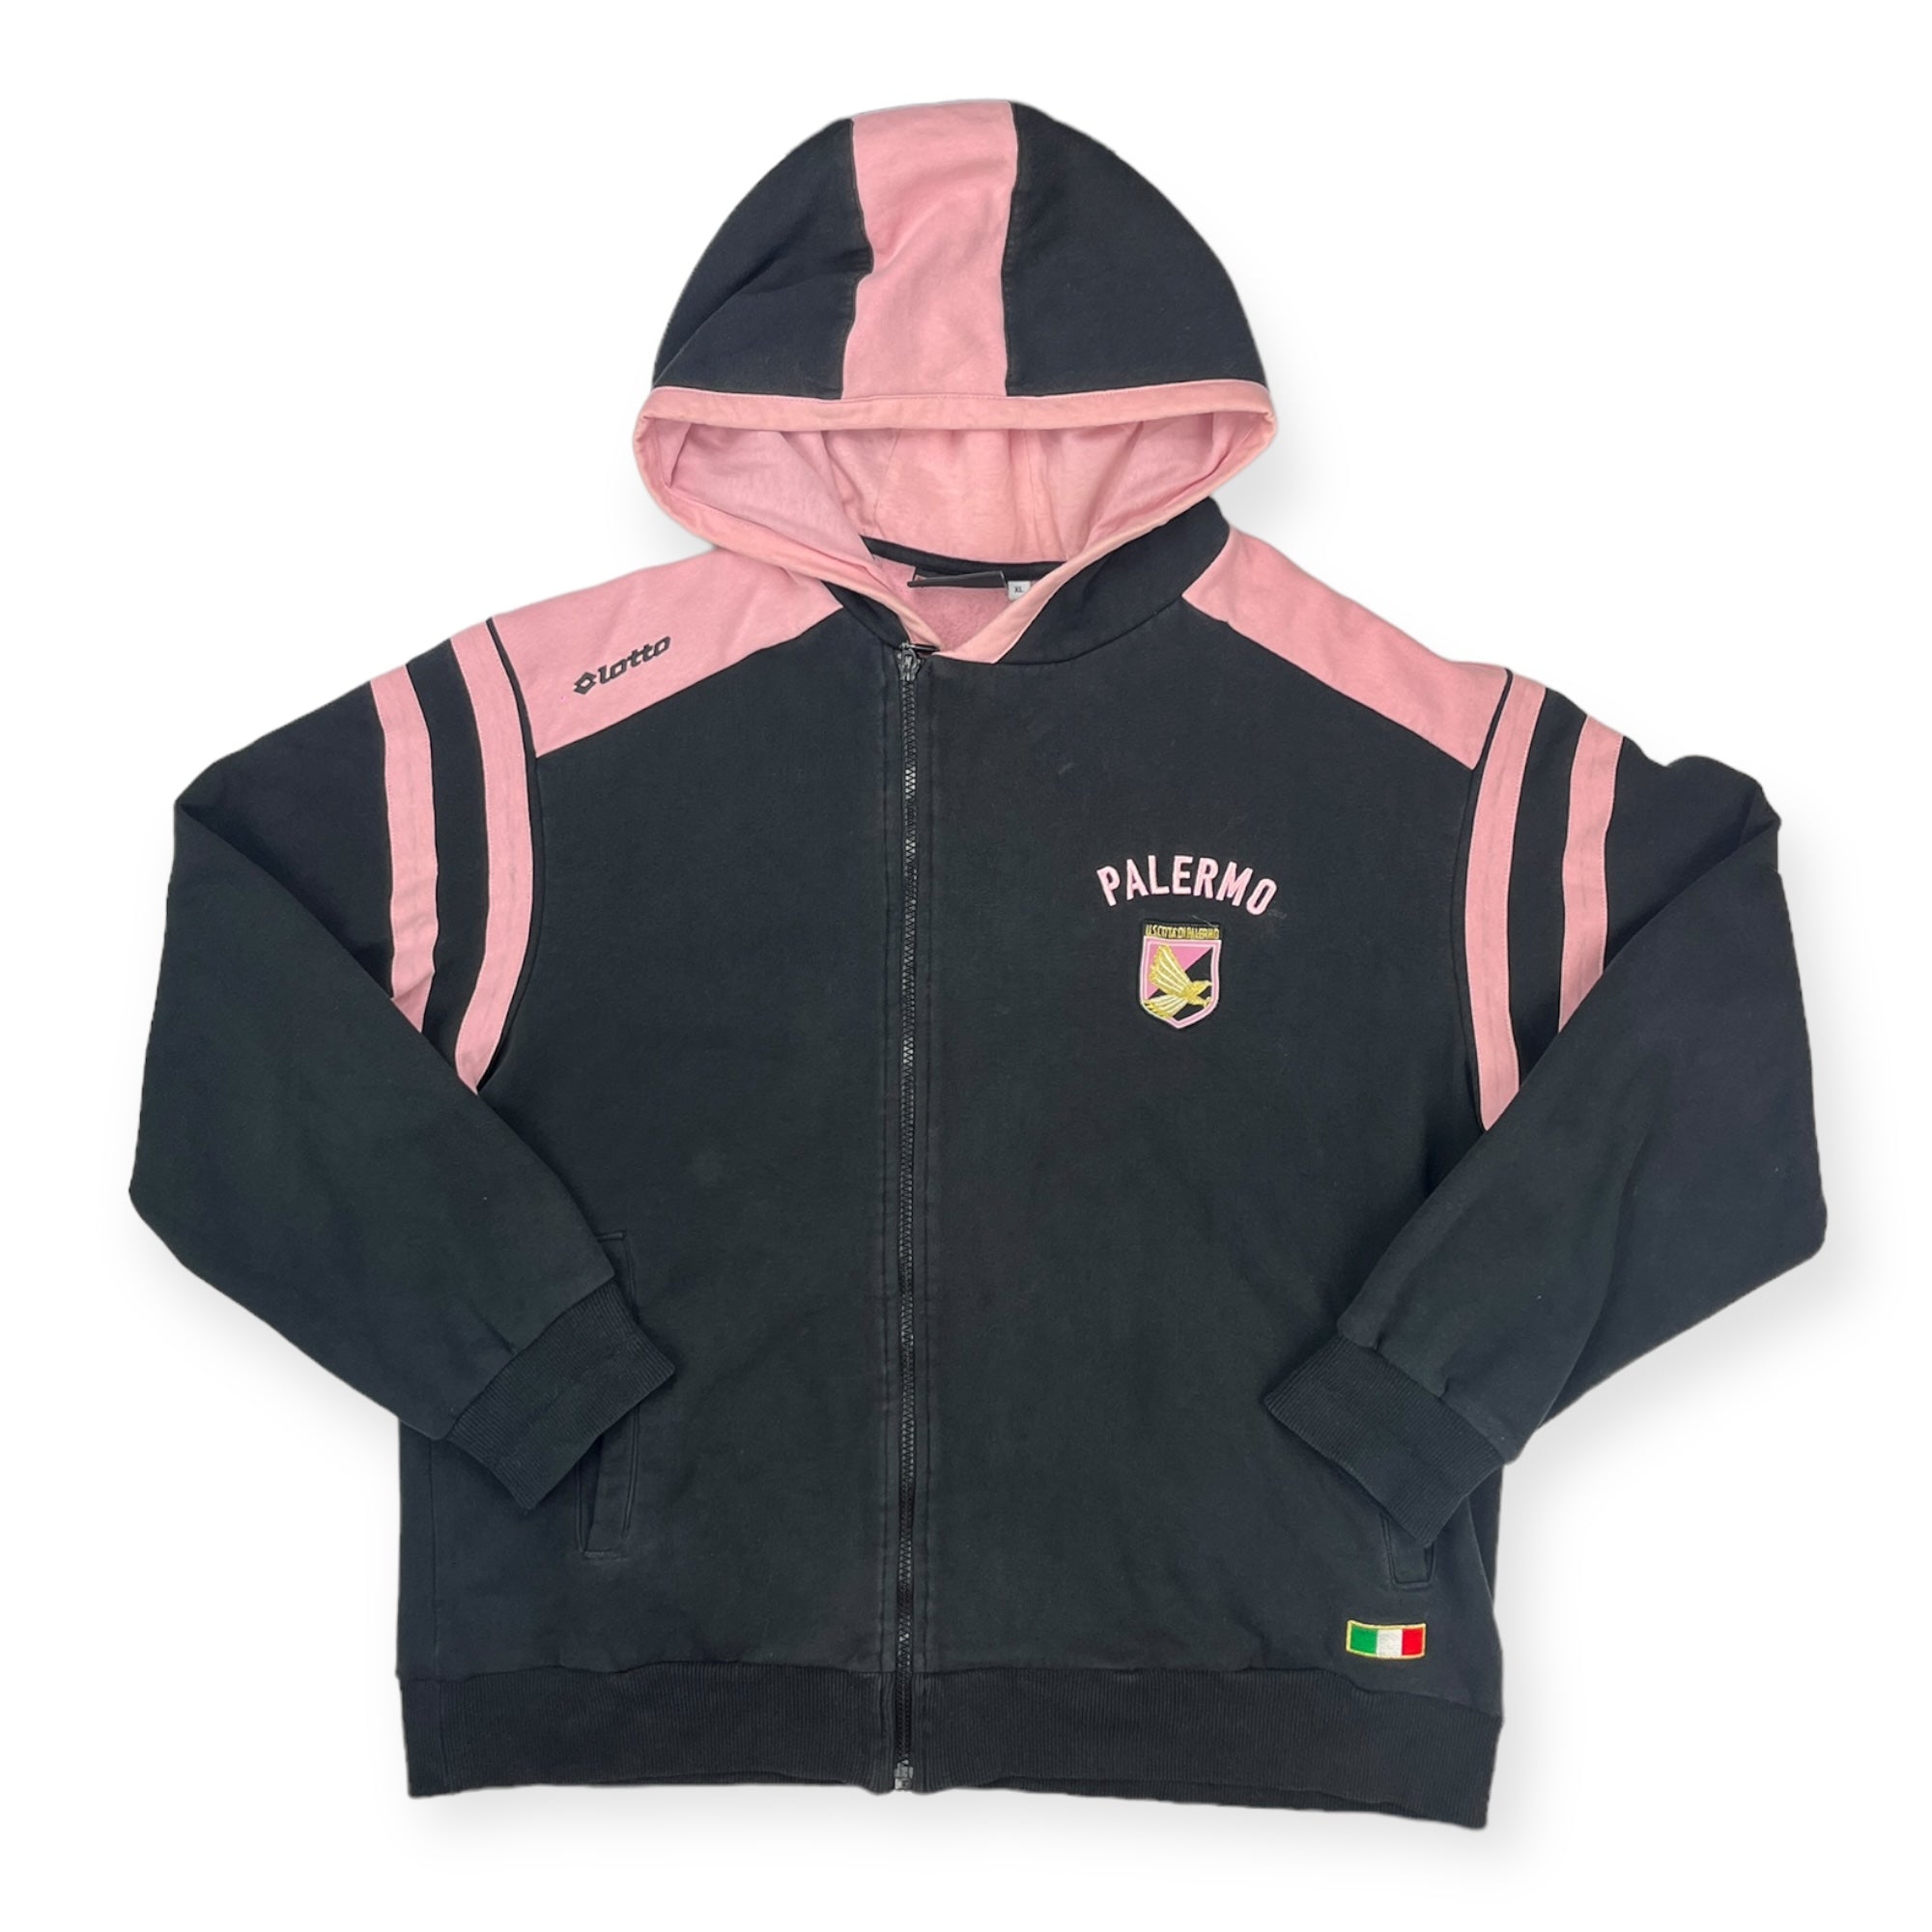 Palermo Lotto Hoodie